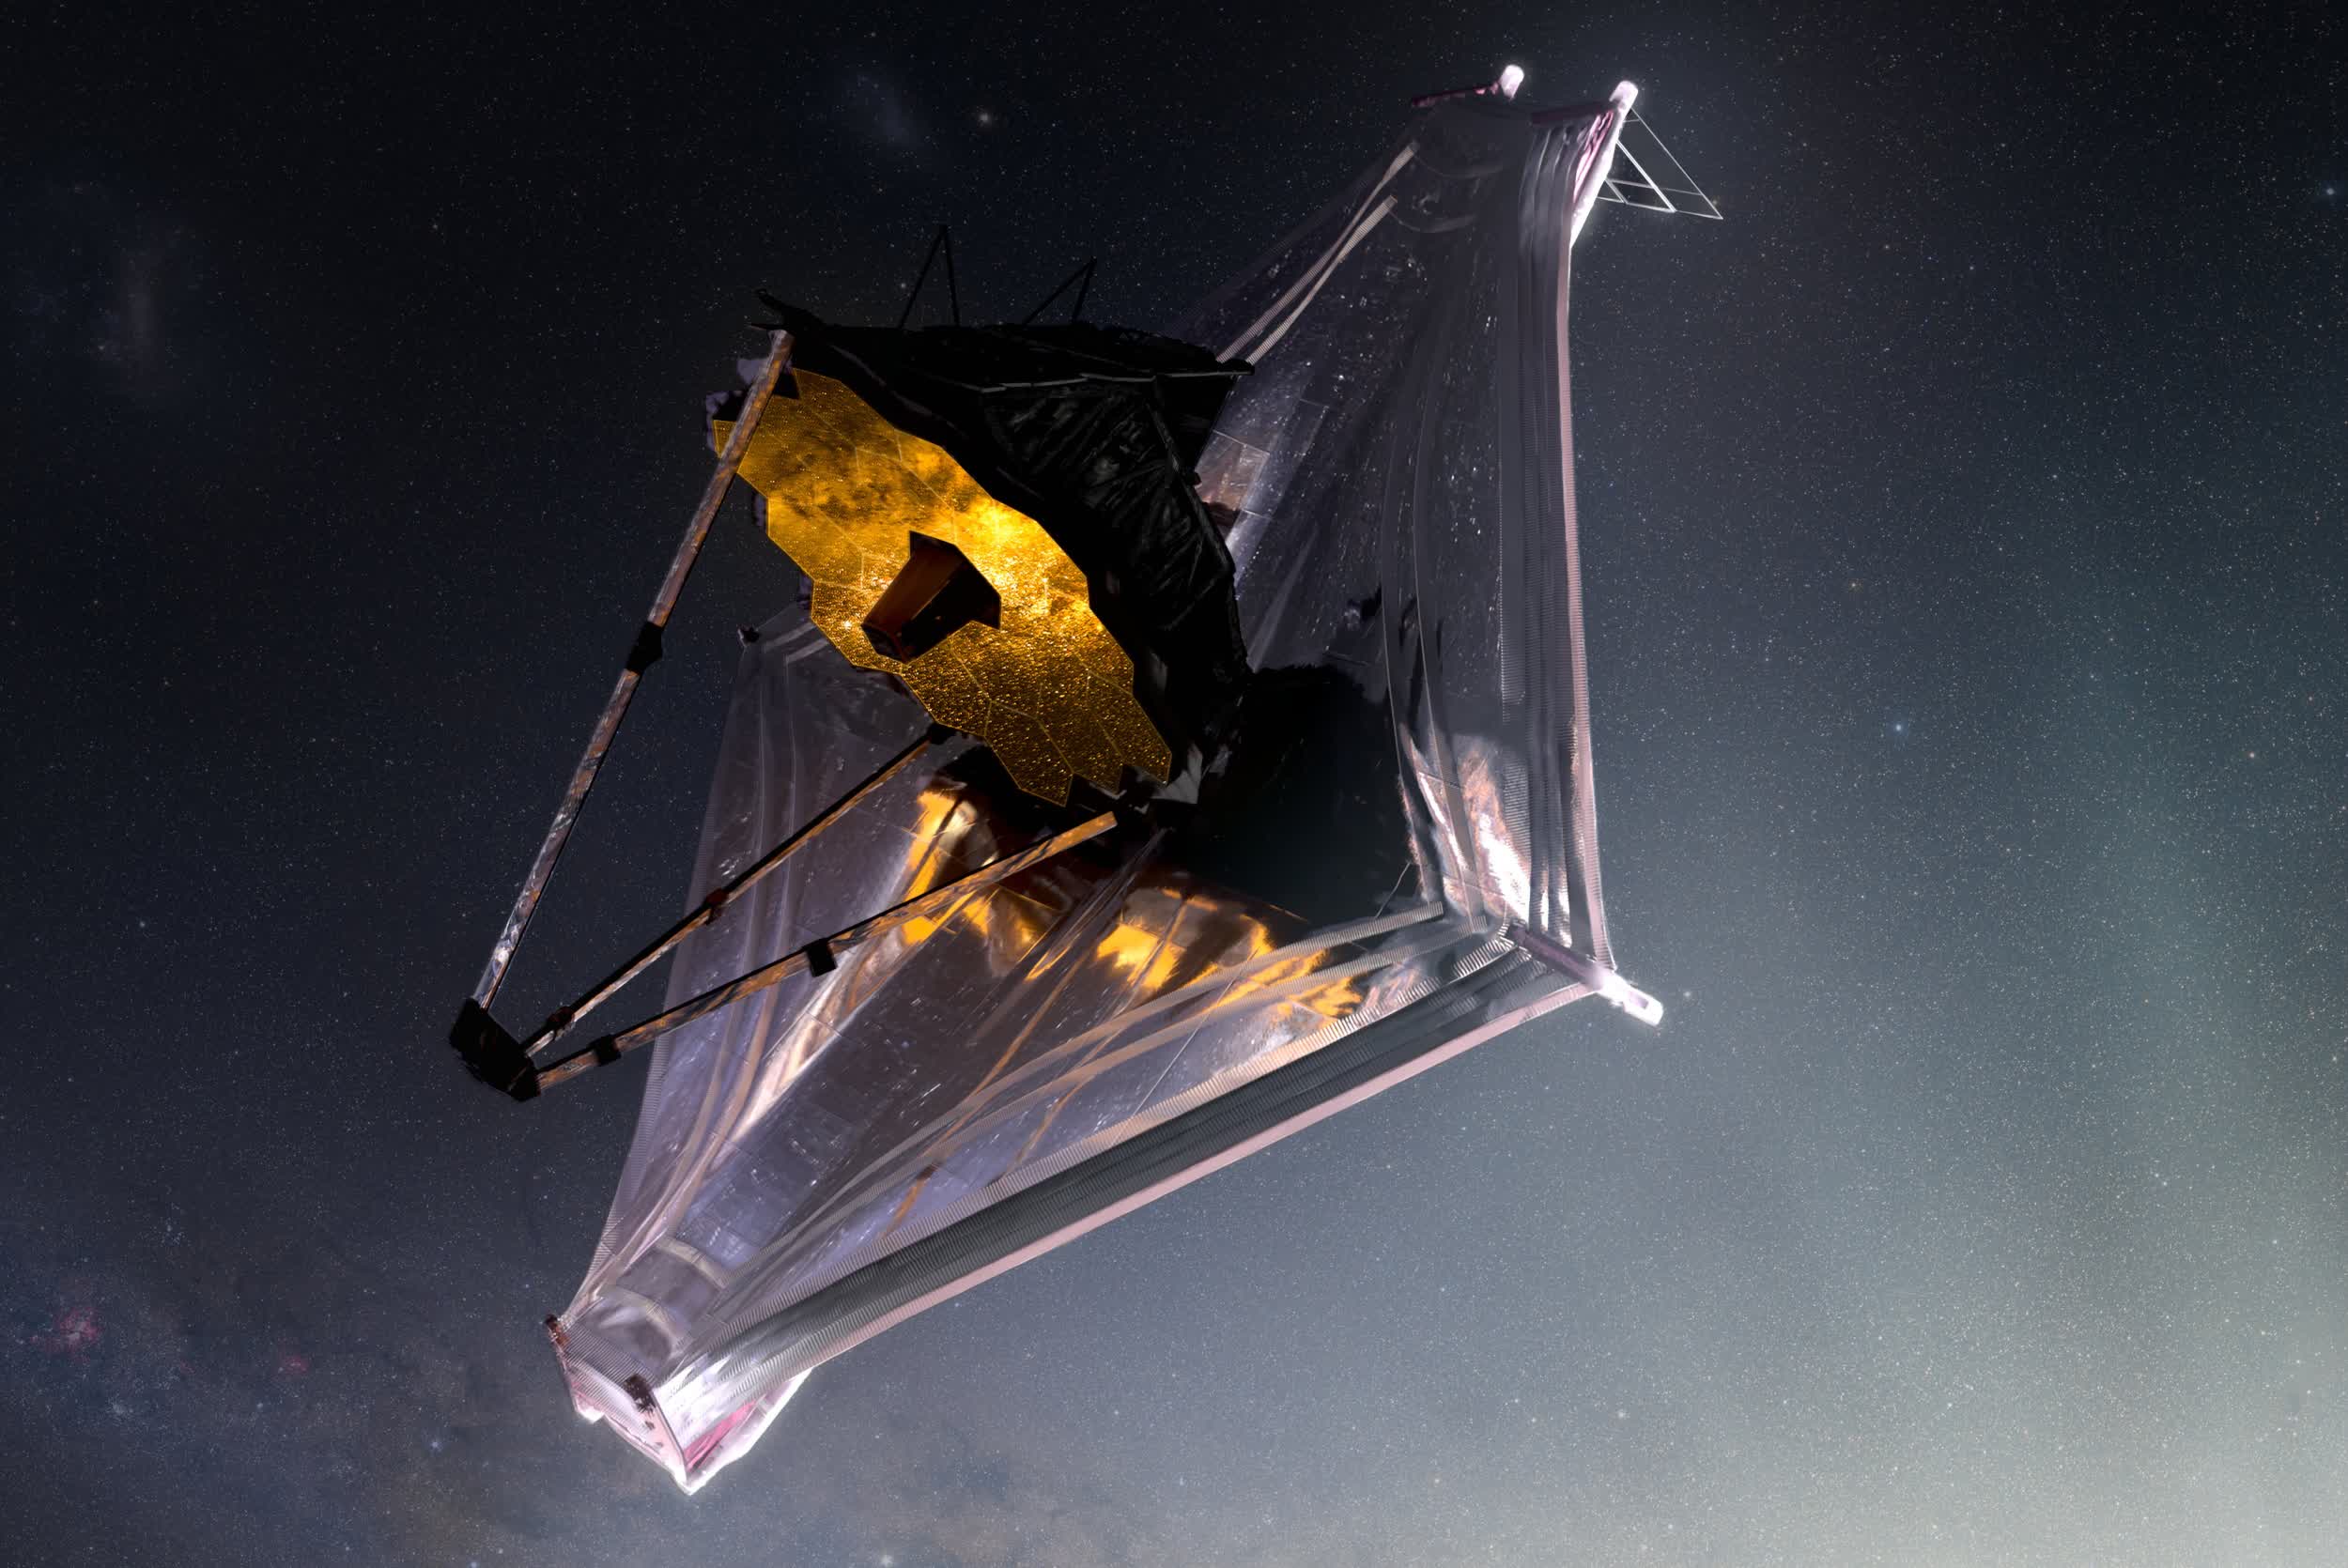 NASA's James Webb Space Telescope reaches final destination nearly a million miles from Earth